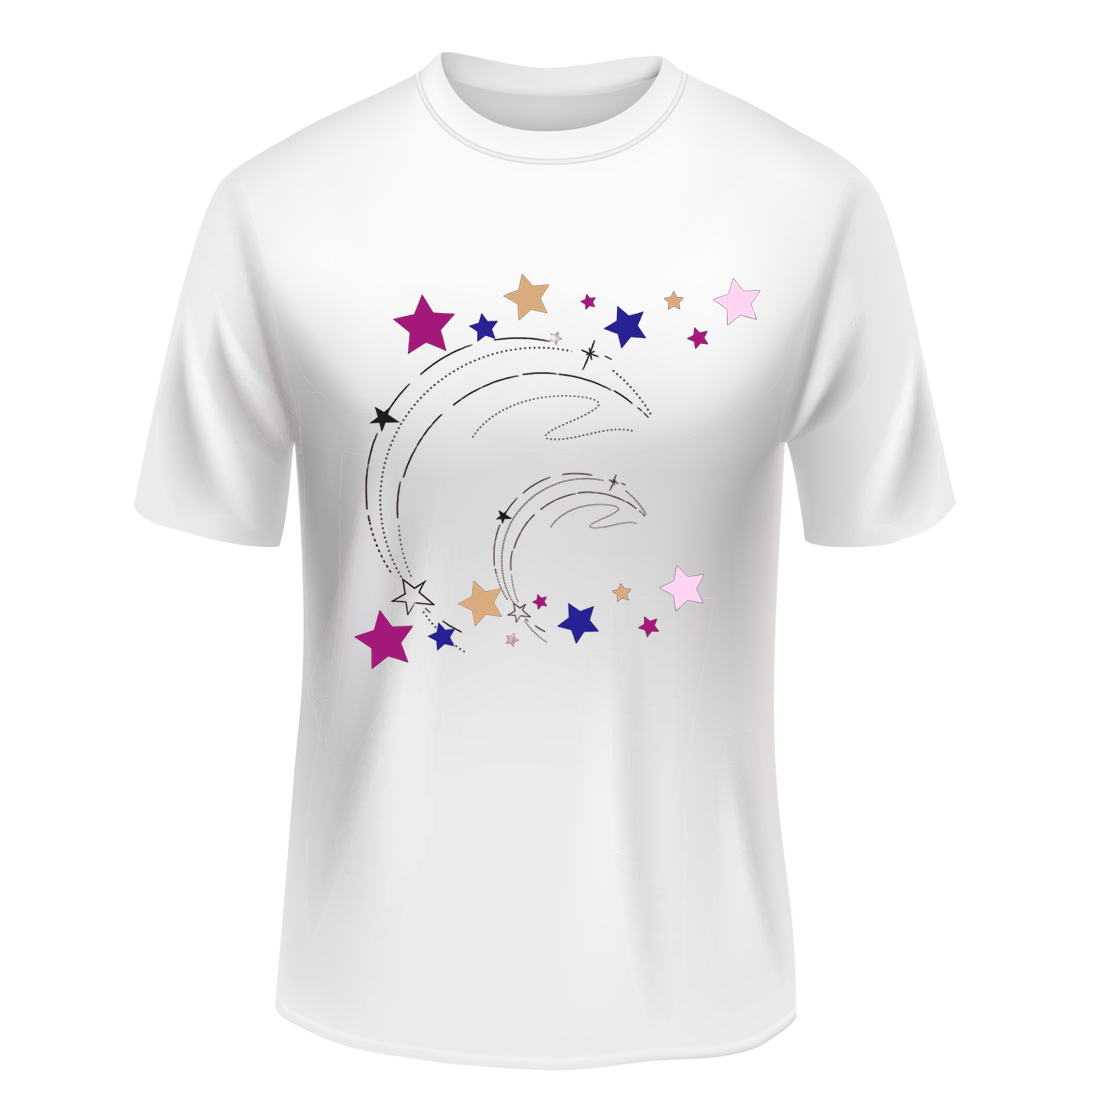 T-shirt design for printing - Moon | Stars cover image.